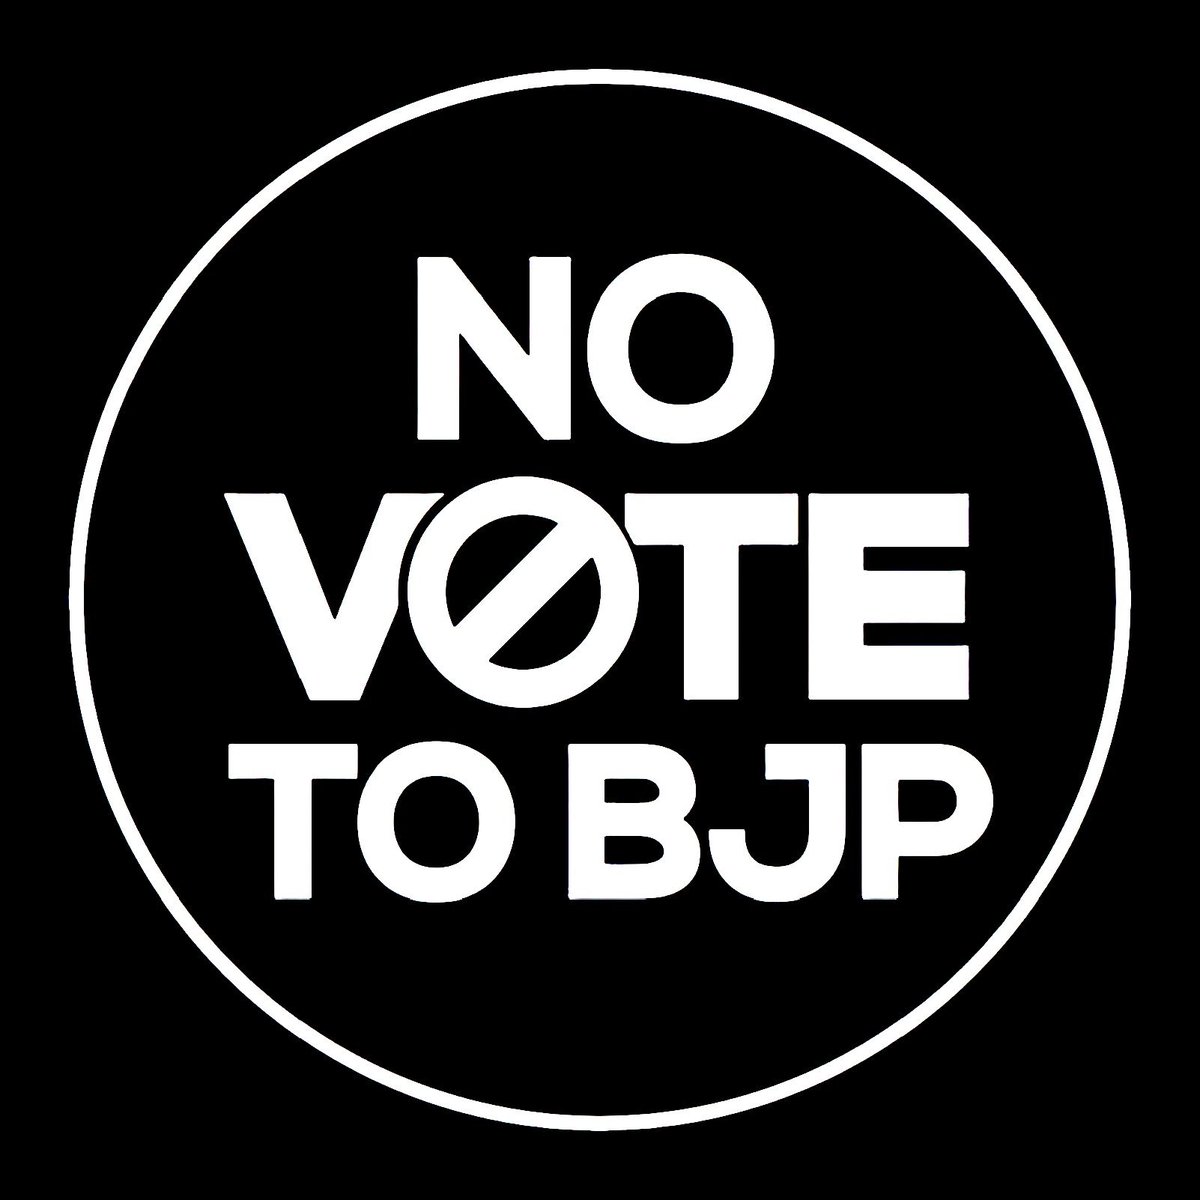 Thread on #MuslimAppeasement by @BJP4India (2014-2019) JaiHo! @narendramodi @AmitShah. Kindly stay away from #Odisha. #Hindus No Vote to #BJP